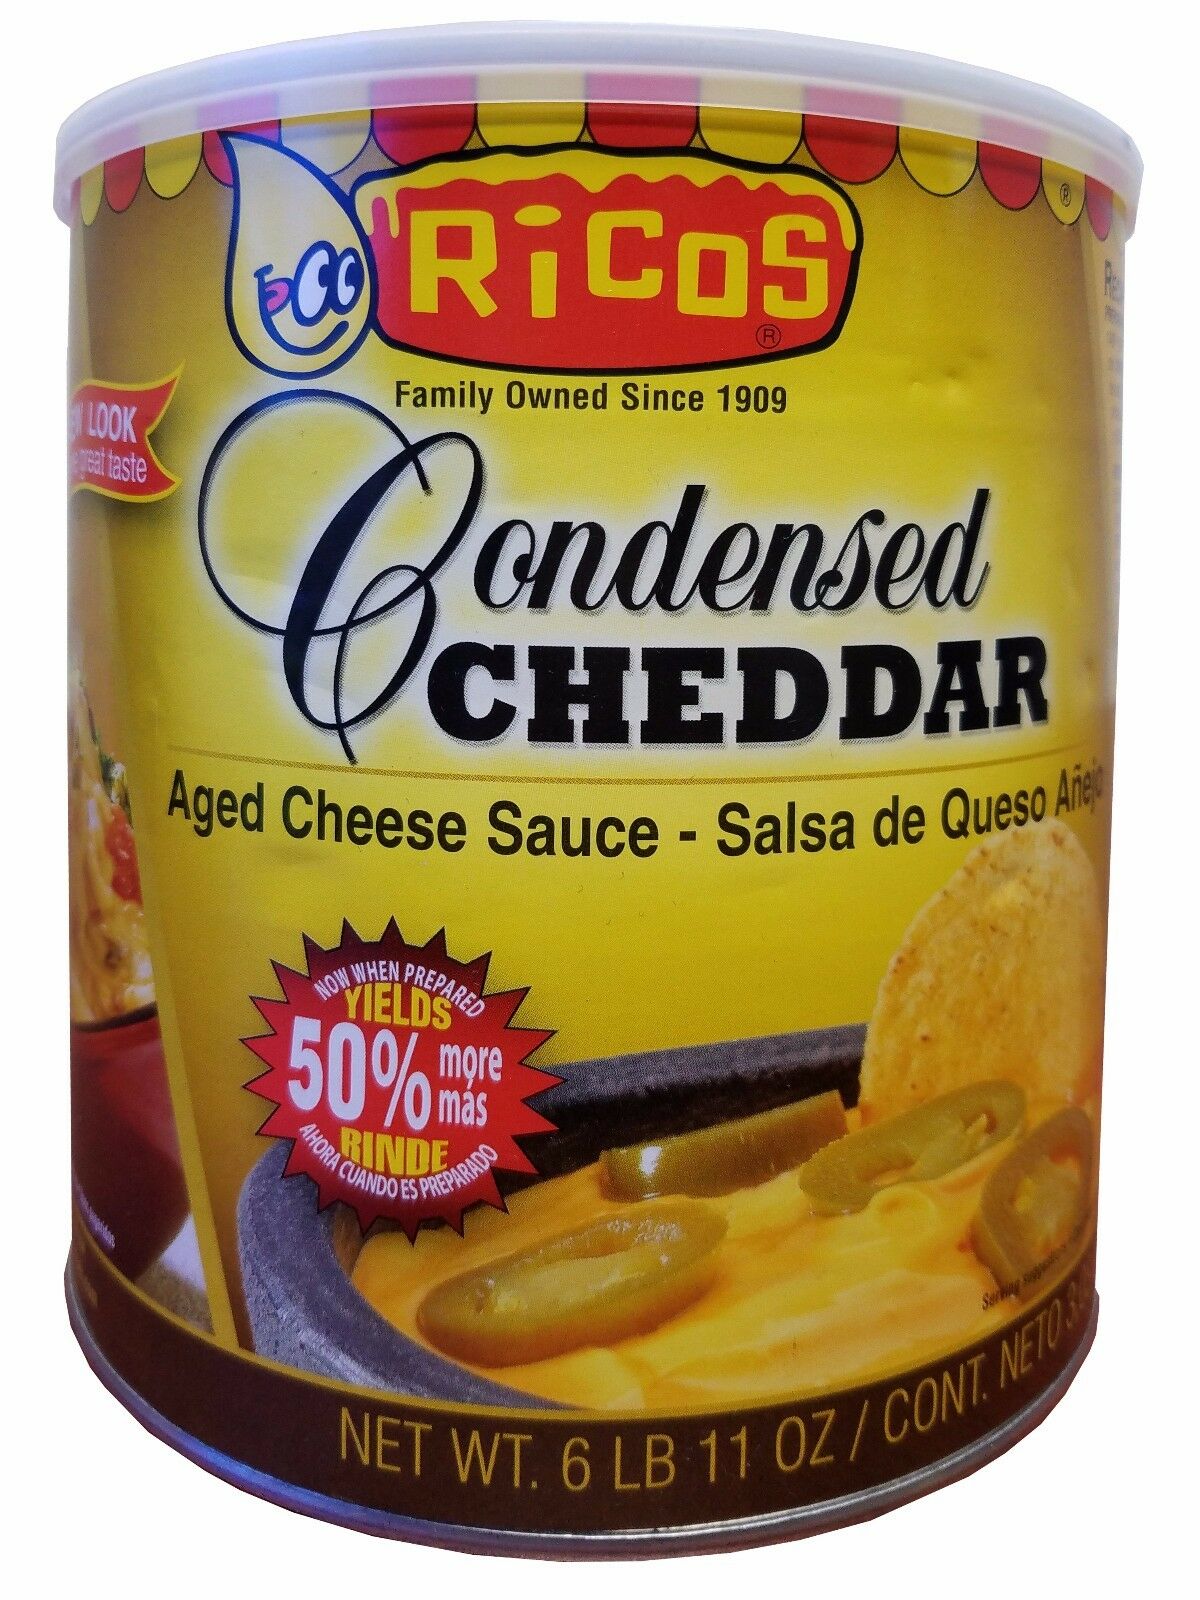 Ricos Condensed Cheddar Aged Cheese Sauce Large Jar 6 Lb 11 Oz